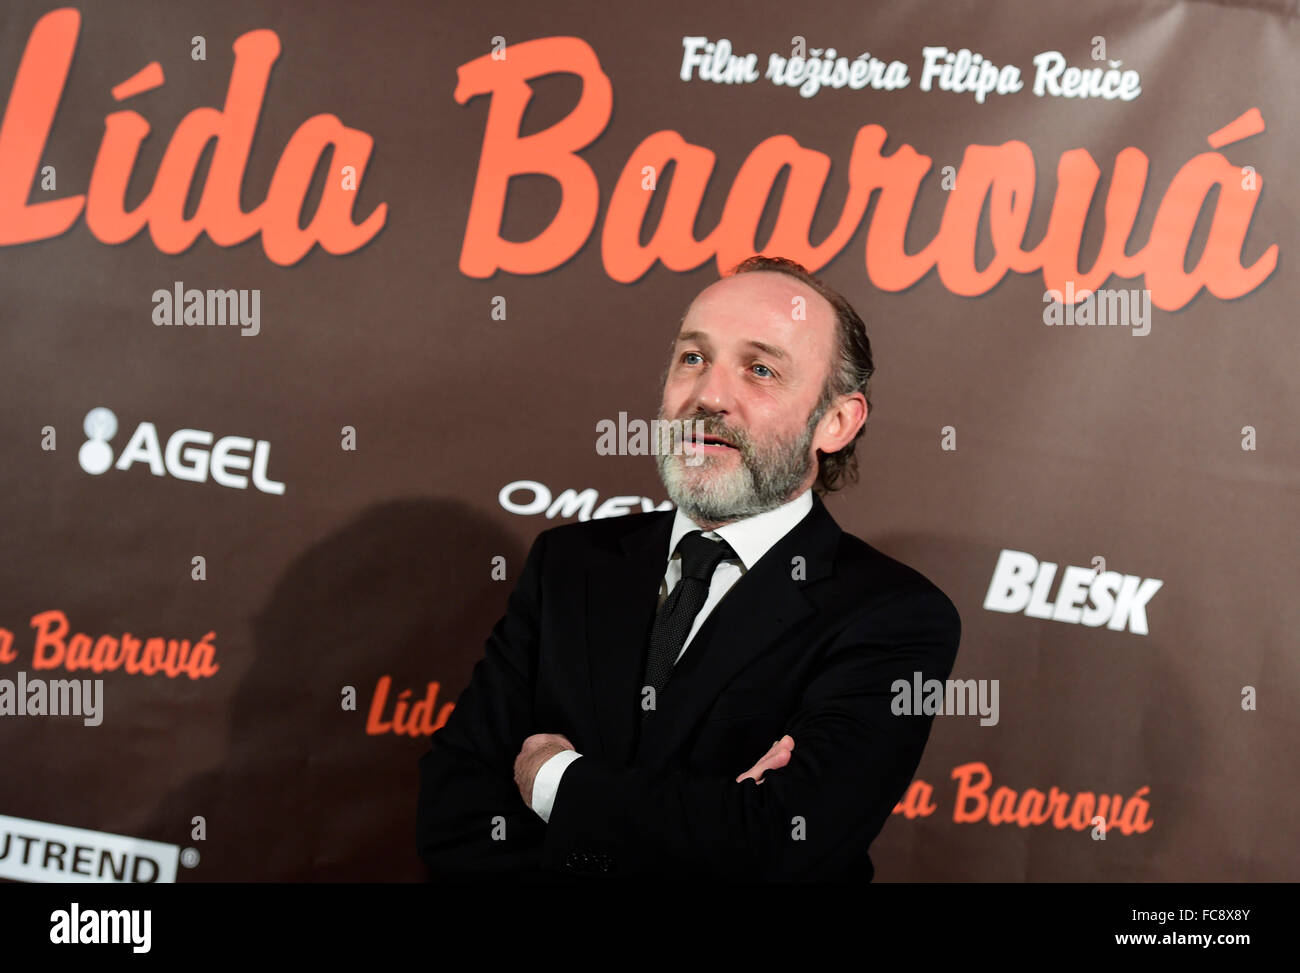 A new Czech film about star actress Lida Baarova, who was mistress of the Nazi Germany Propaganda Minister Joseph Goebbels (pictured Austrian actor Karl Markovics, who personates Goebbles in the movie) before the war, had its official premiere in Prague this evening and it will be presented by cinemas all over the country as of Thursday. The film's English title is The Devil's Mistress. Film director Filip Renc told CTK that the screenplay is not a life story of Baarova as it shows only a part of her life from 1936 to the era after World War Two. Renc, 50, was among the personalities whom Pres Stock Photo